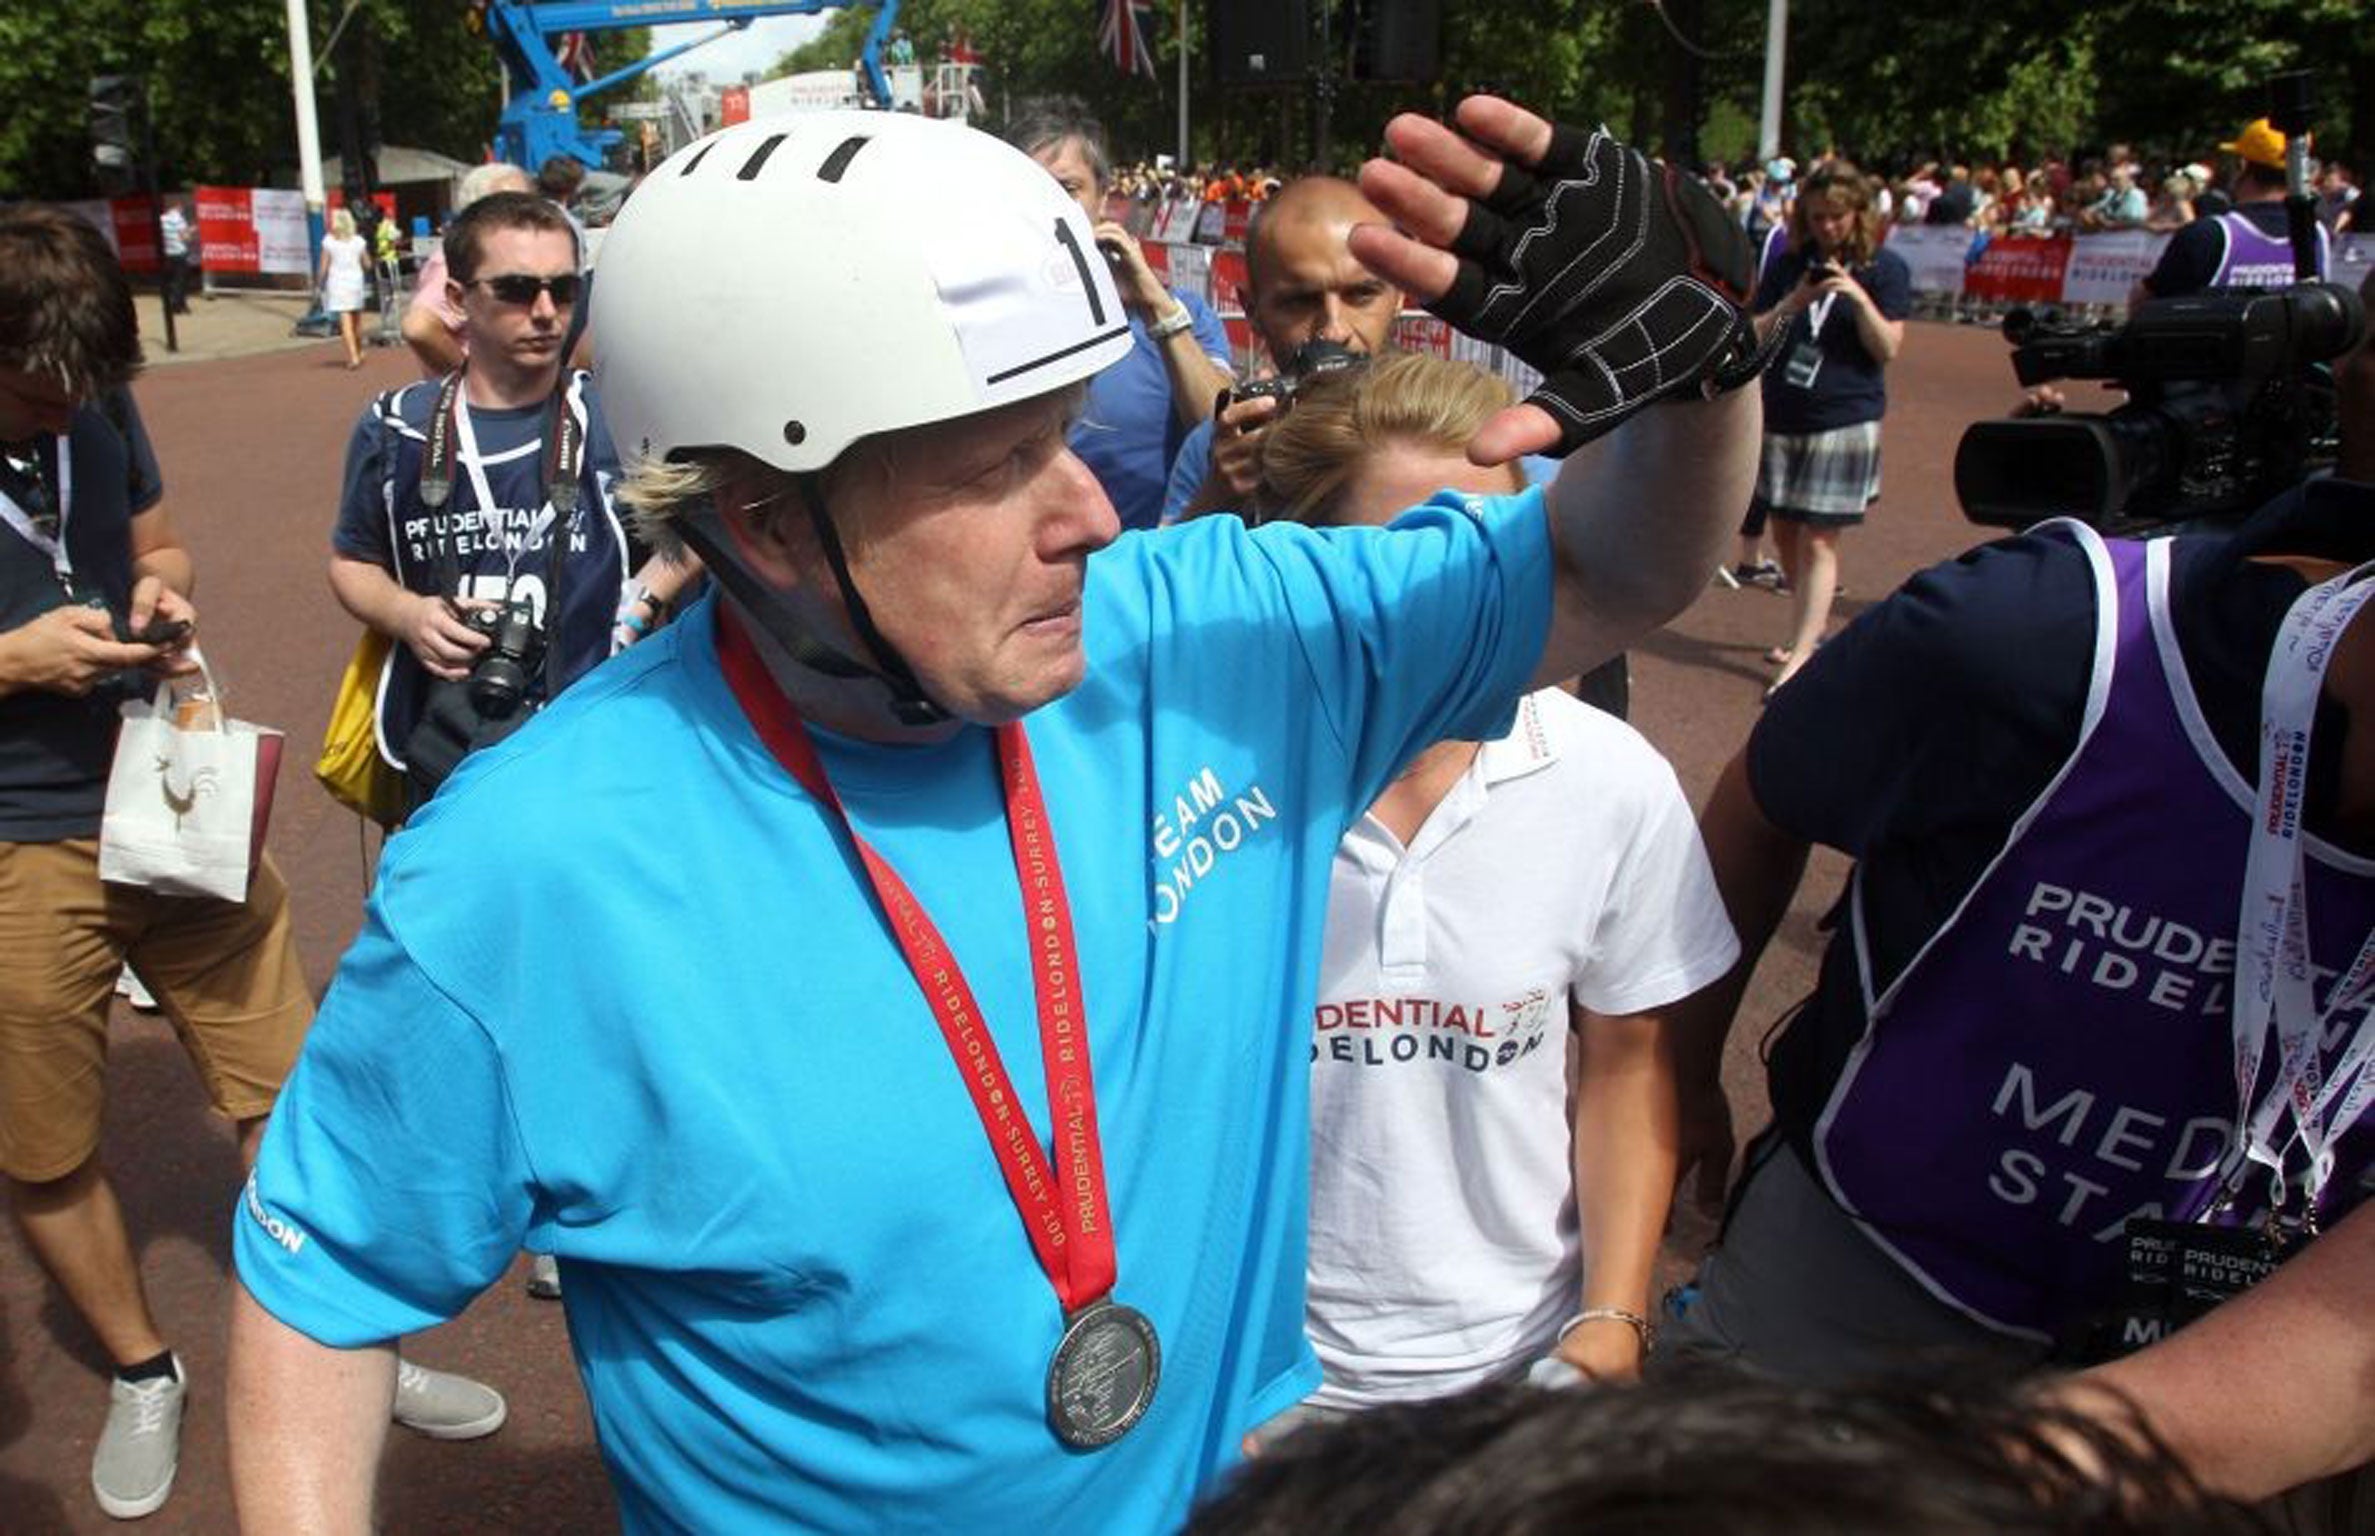 A cyclist accused of hurling abuse at Boris Johnson during the 100-mile RideLondon event yesterday has denied calling the Mayor of London a "fat b*****d" after Mr Johnson wrote a tirade about the incident in a newspaper column.